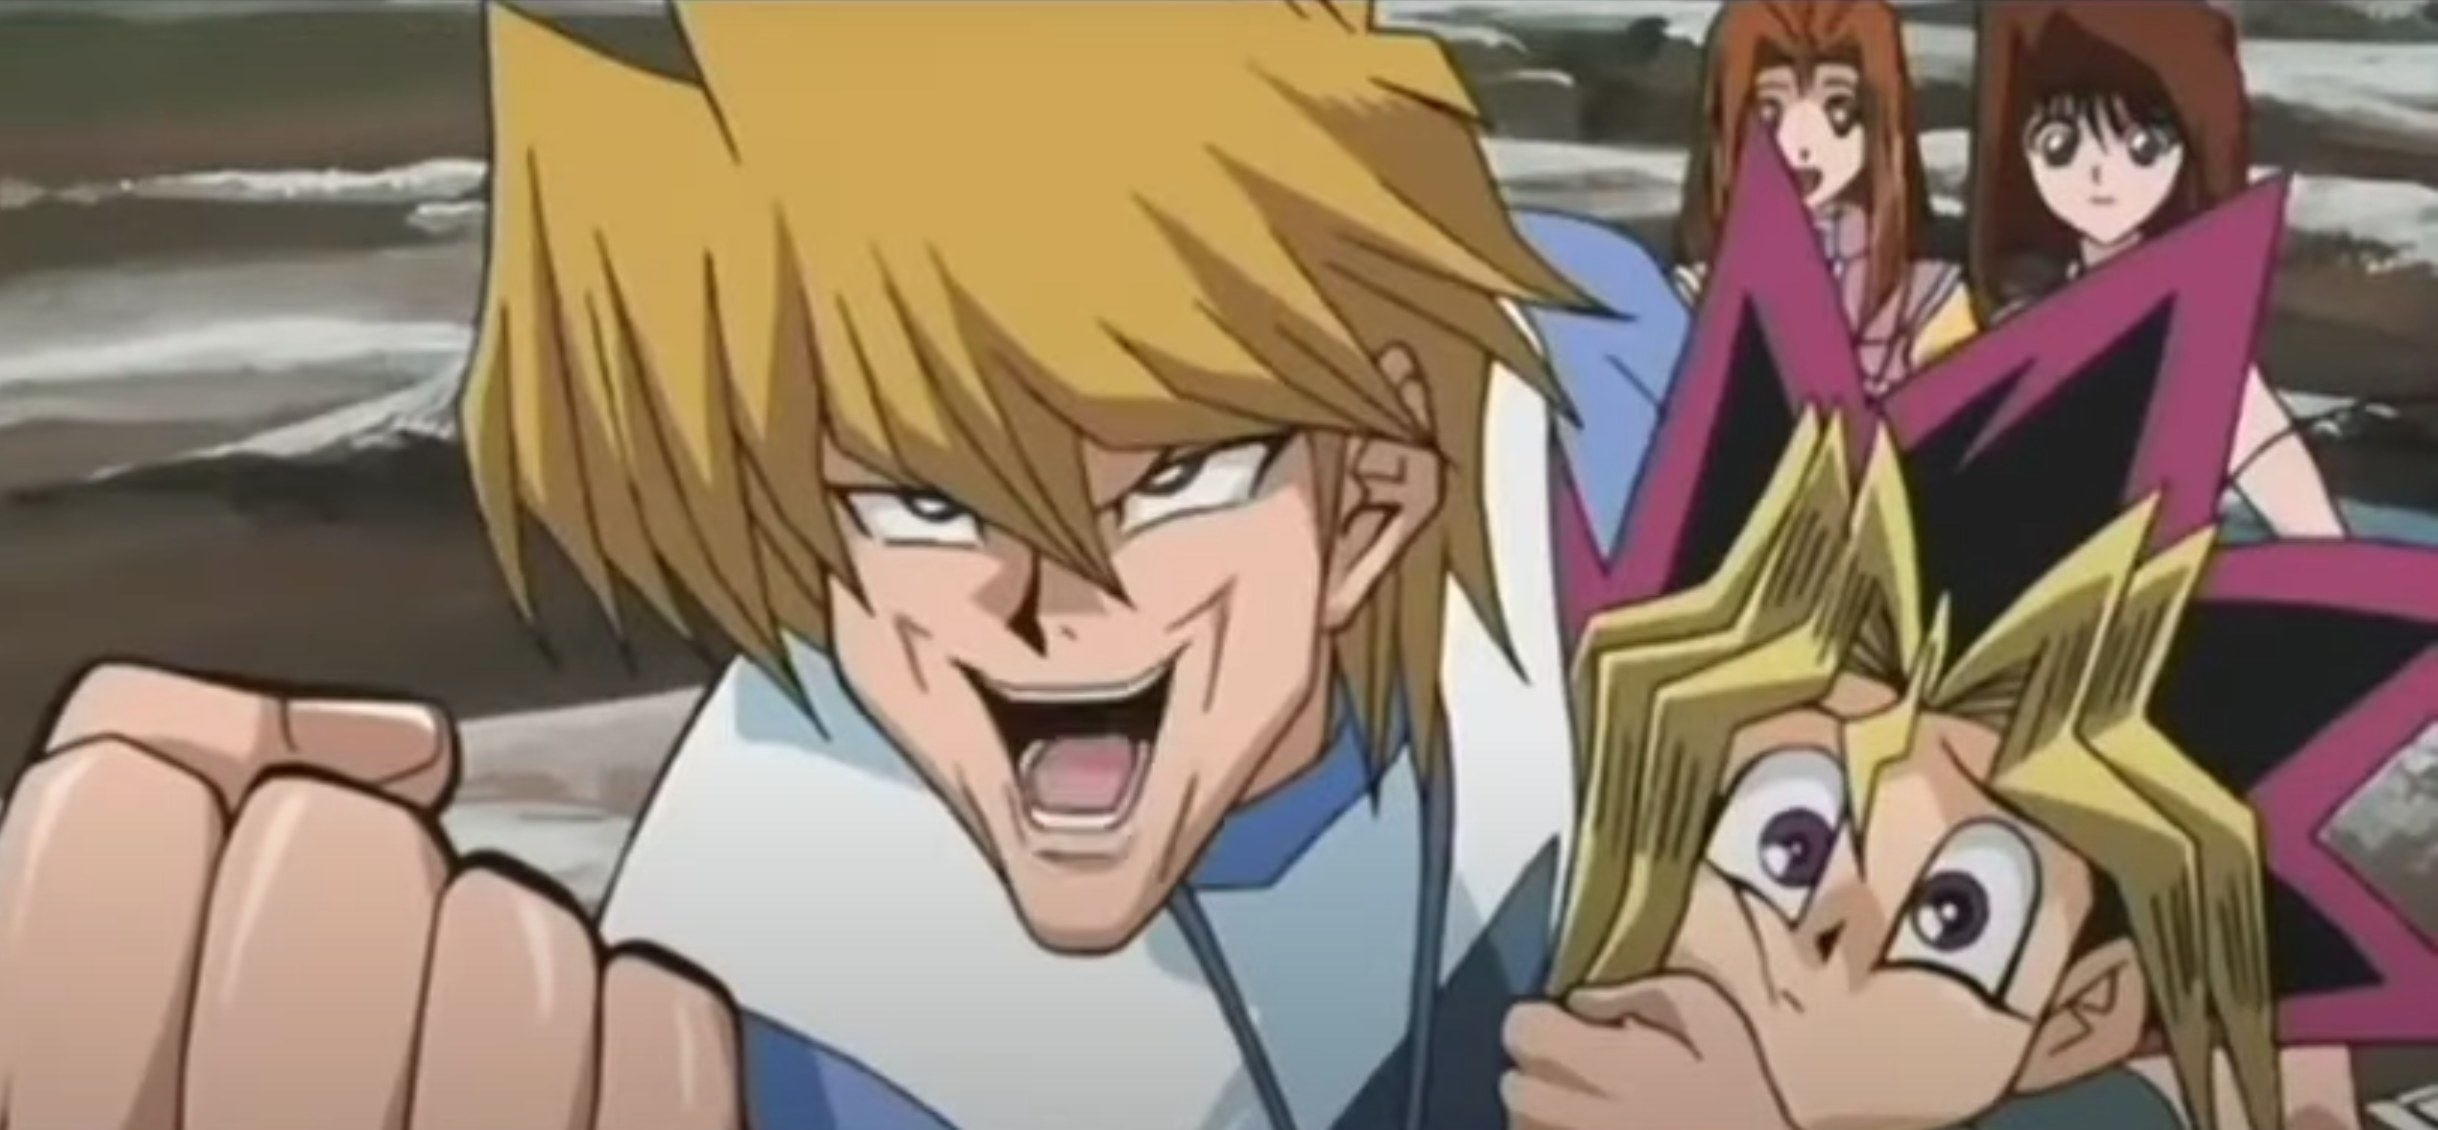 Joey making a funny face while holding Yugi